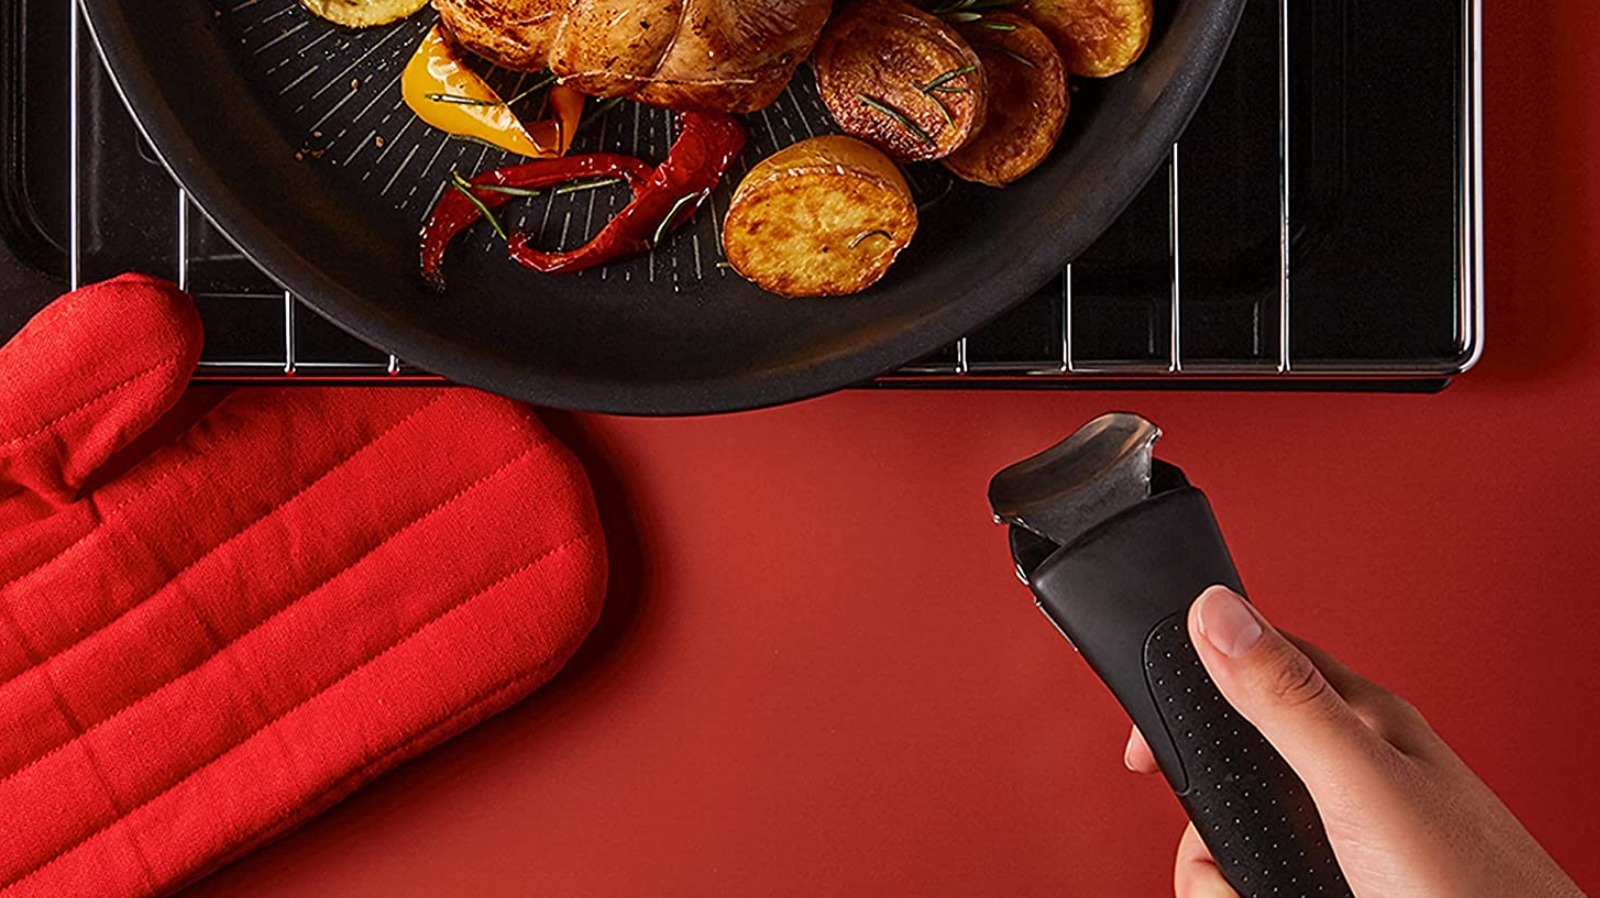 https://www.mashed.com/img/gallery/tiktok-is-fascinated-by-this-adjustable-pan-handle/l-intro-1645721499.jpg